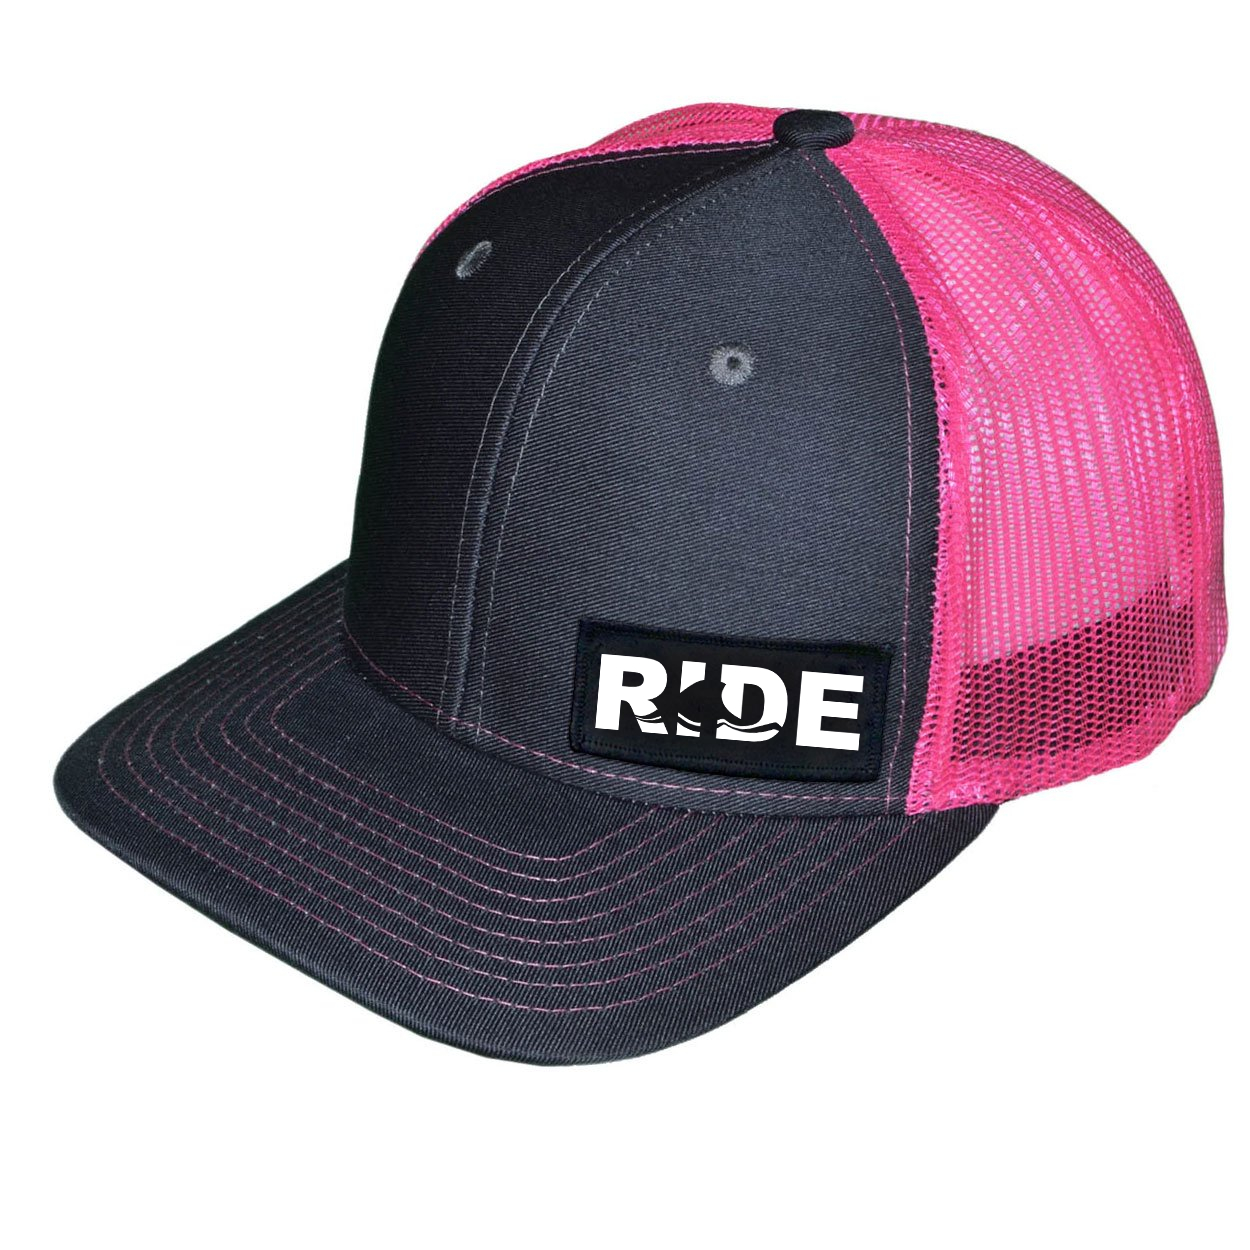 Ride Wave Logo Night Out Woven Patch Snapback Trucker Hat Dark Gray/Neon Pink (White Logo)